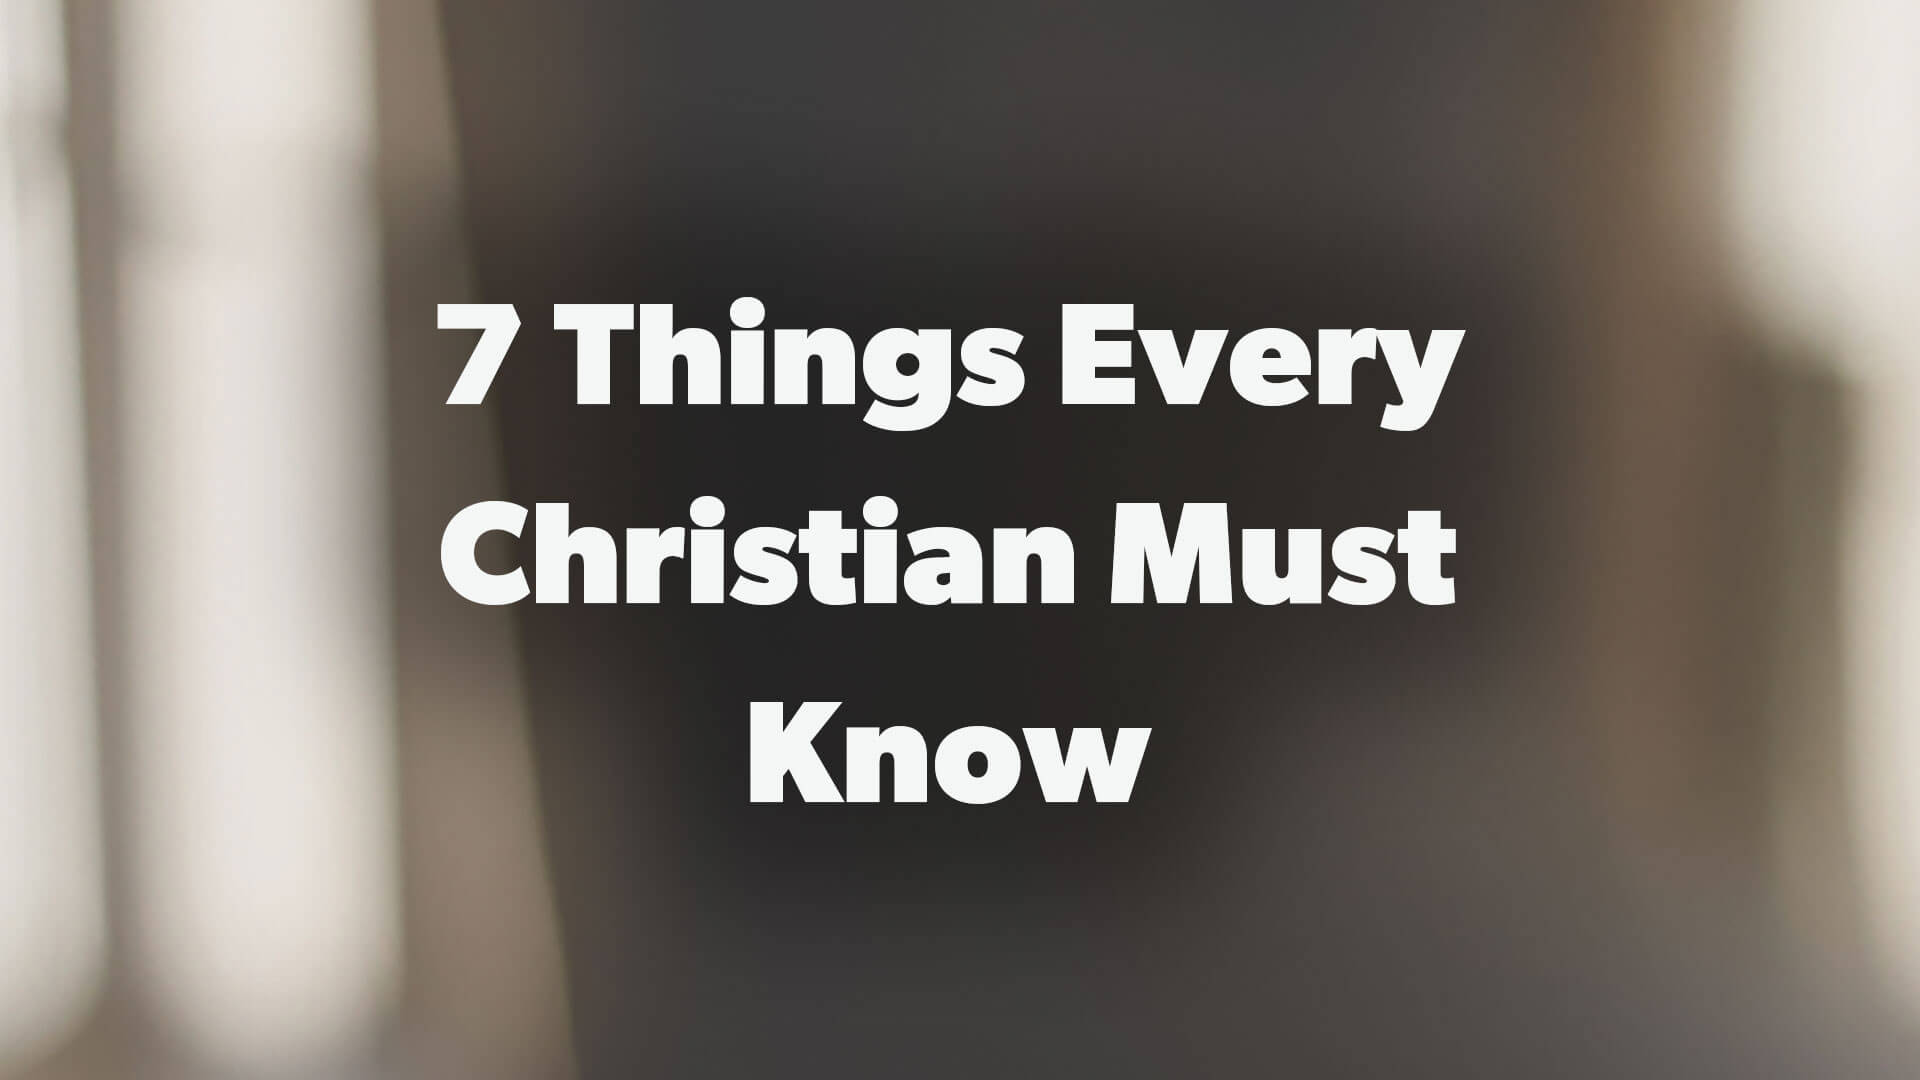 7 Things Every Christian Must Know